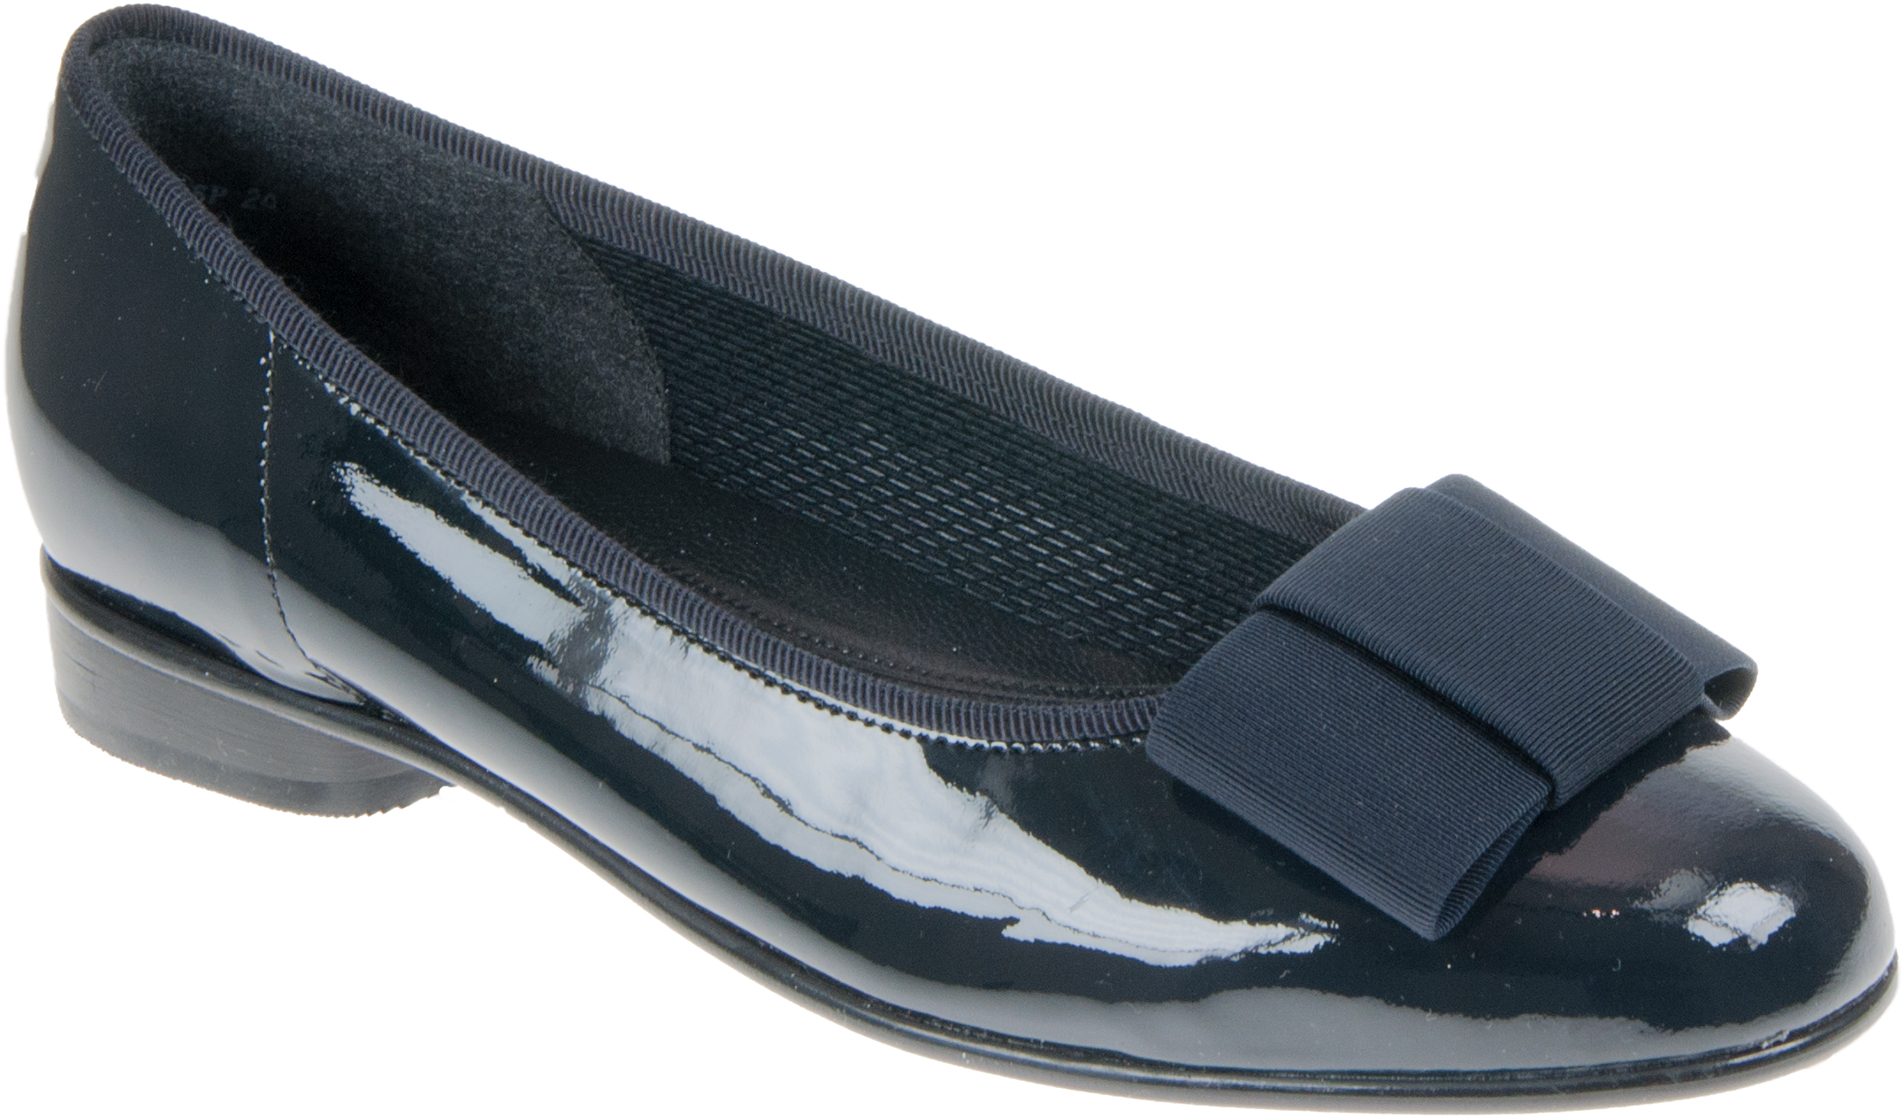 Blive gift nul Stereotype Gabor Assist Navy Patent 05.100.96 - Ballerina Shoes - Humphries Shoes